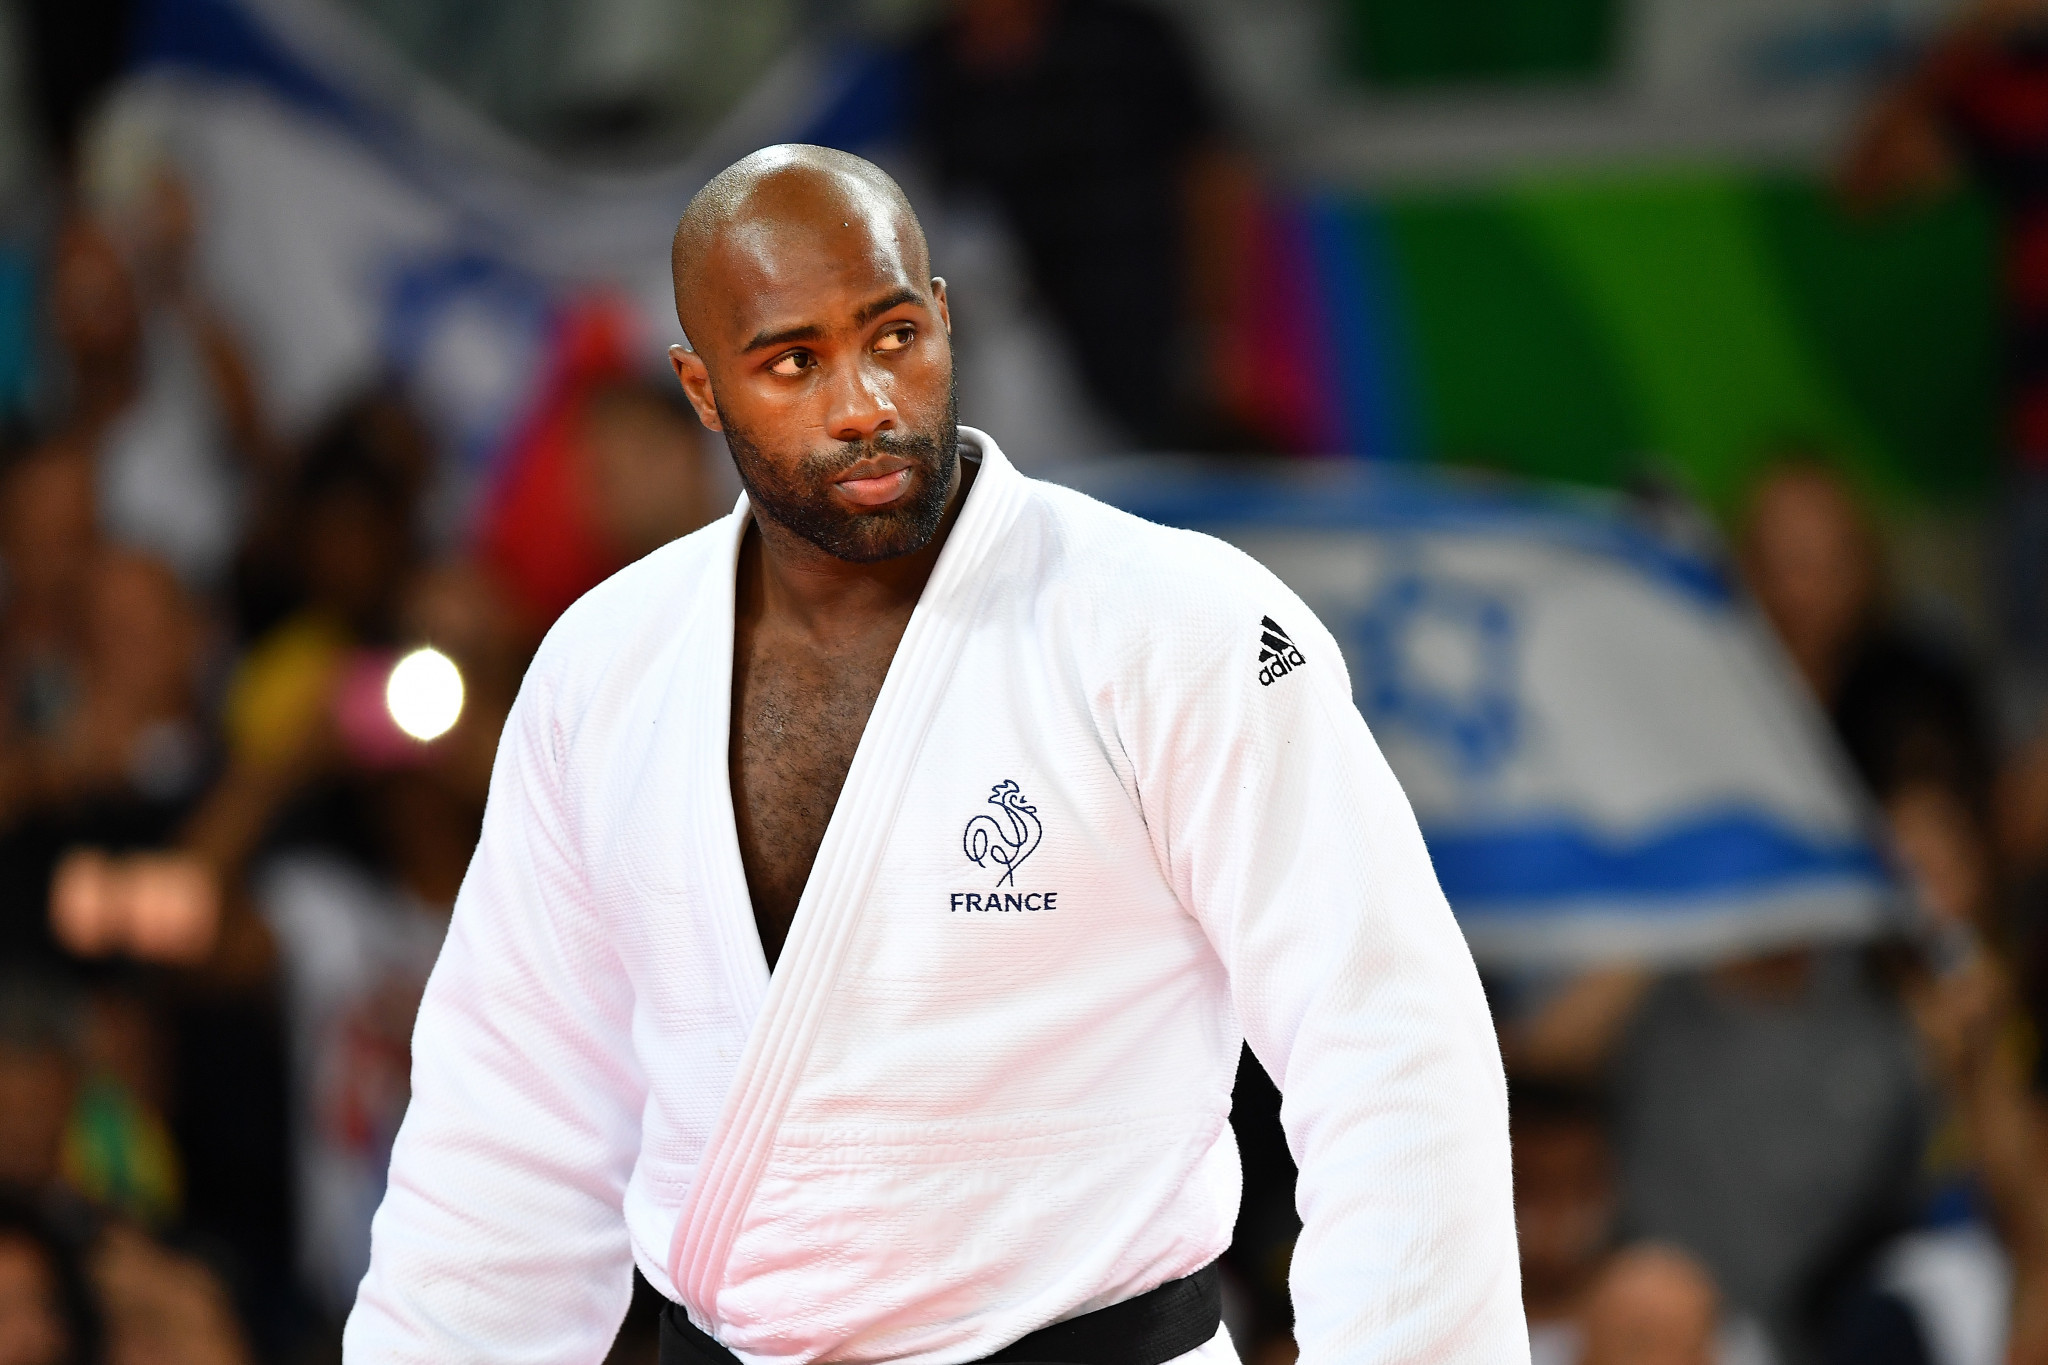 French judo legend Teddy Riner trained in Rio de Janeiro as he began preparing for the Paris 2024 Olympic Games ©Getty Images